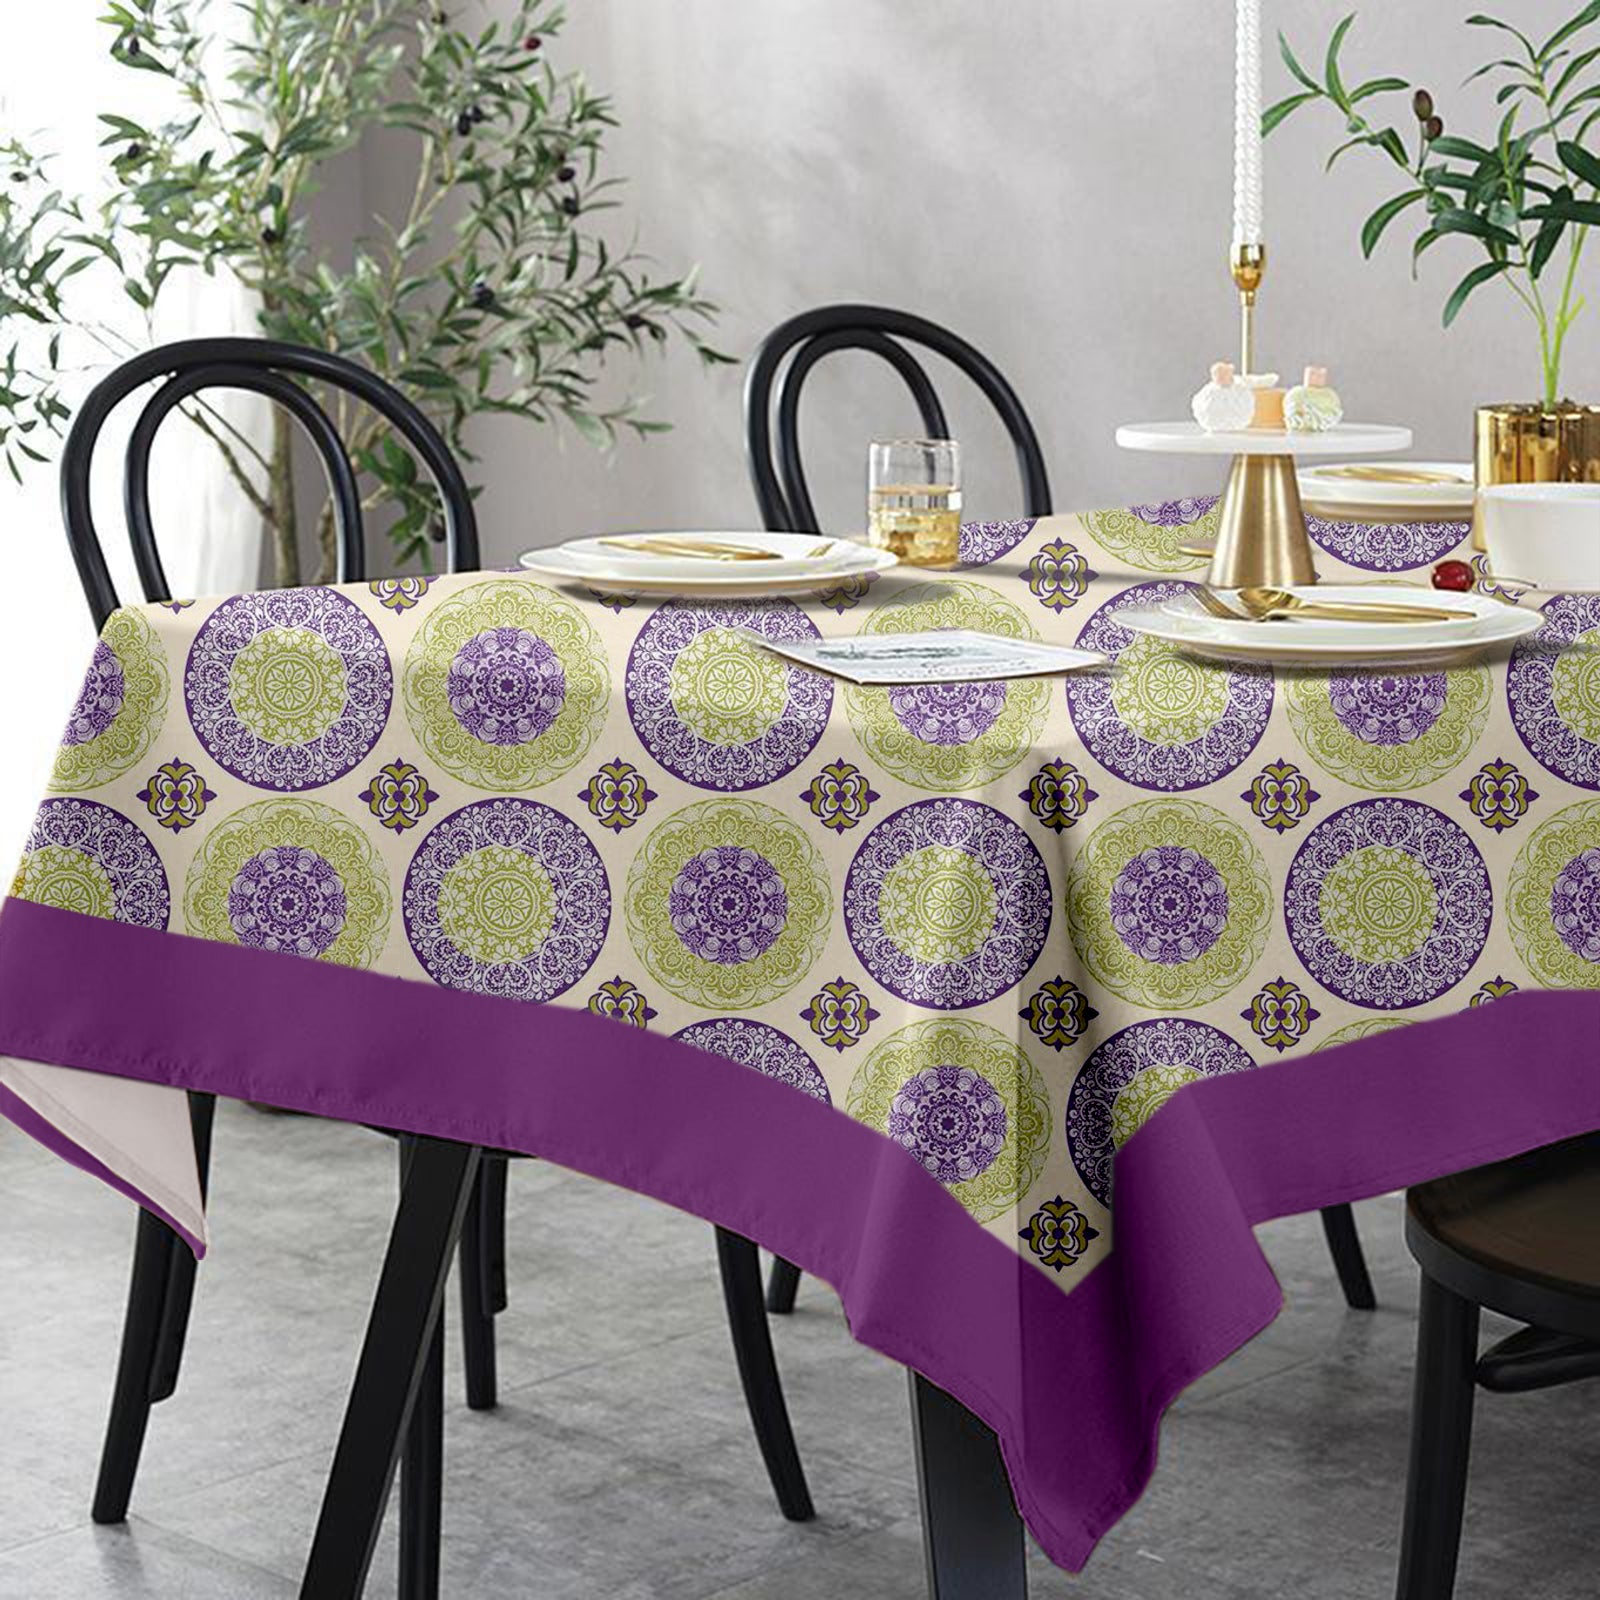 Lushomes dining table cover 4 Seater, Bold Printed Dining Table Cover Cloth Linen, Home Decor Items, table cloth, table cover, dinning table cover  (Pack of 1, 60 x 60 inches)